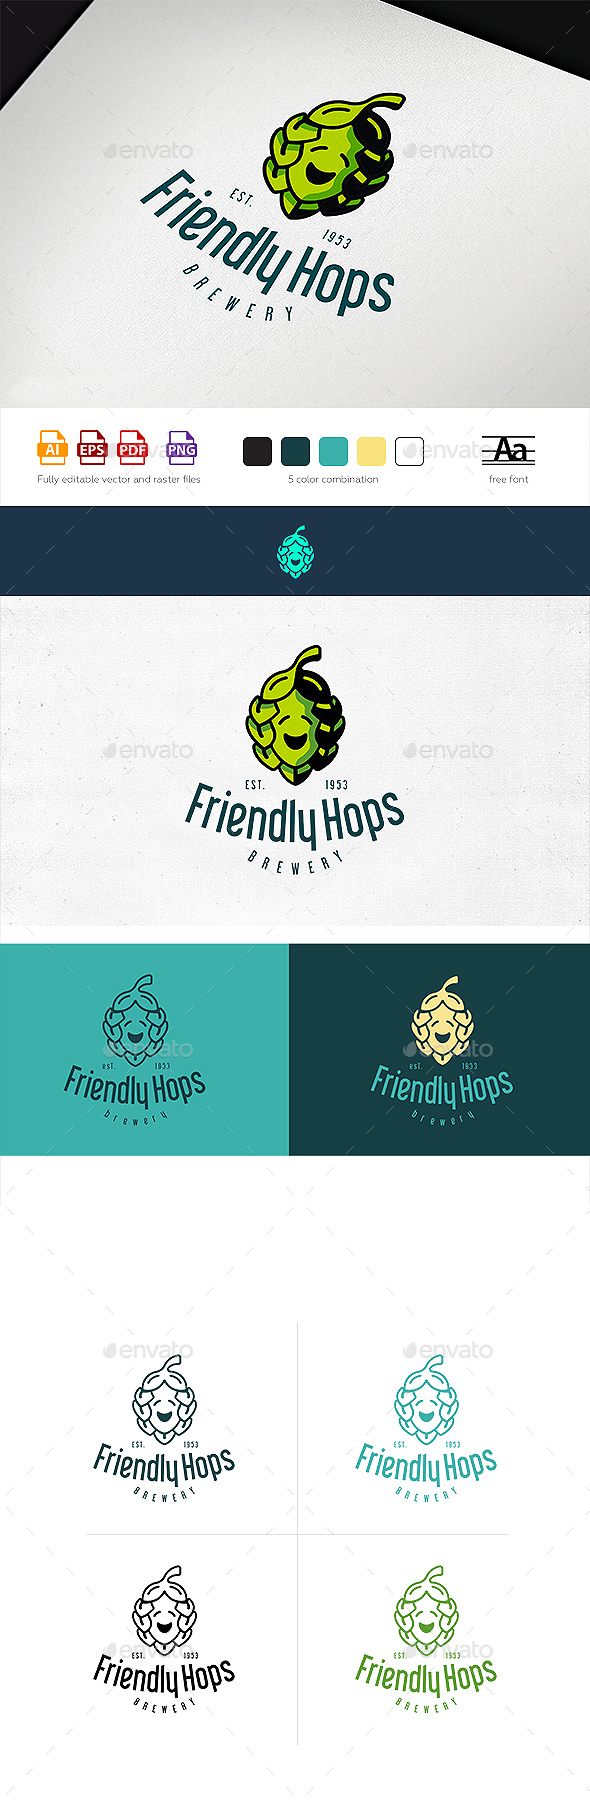 Friendly Hops Bar or Brewery Logo Template